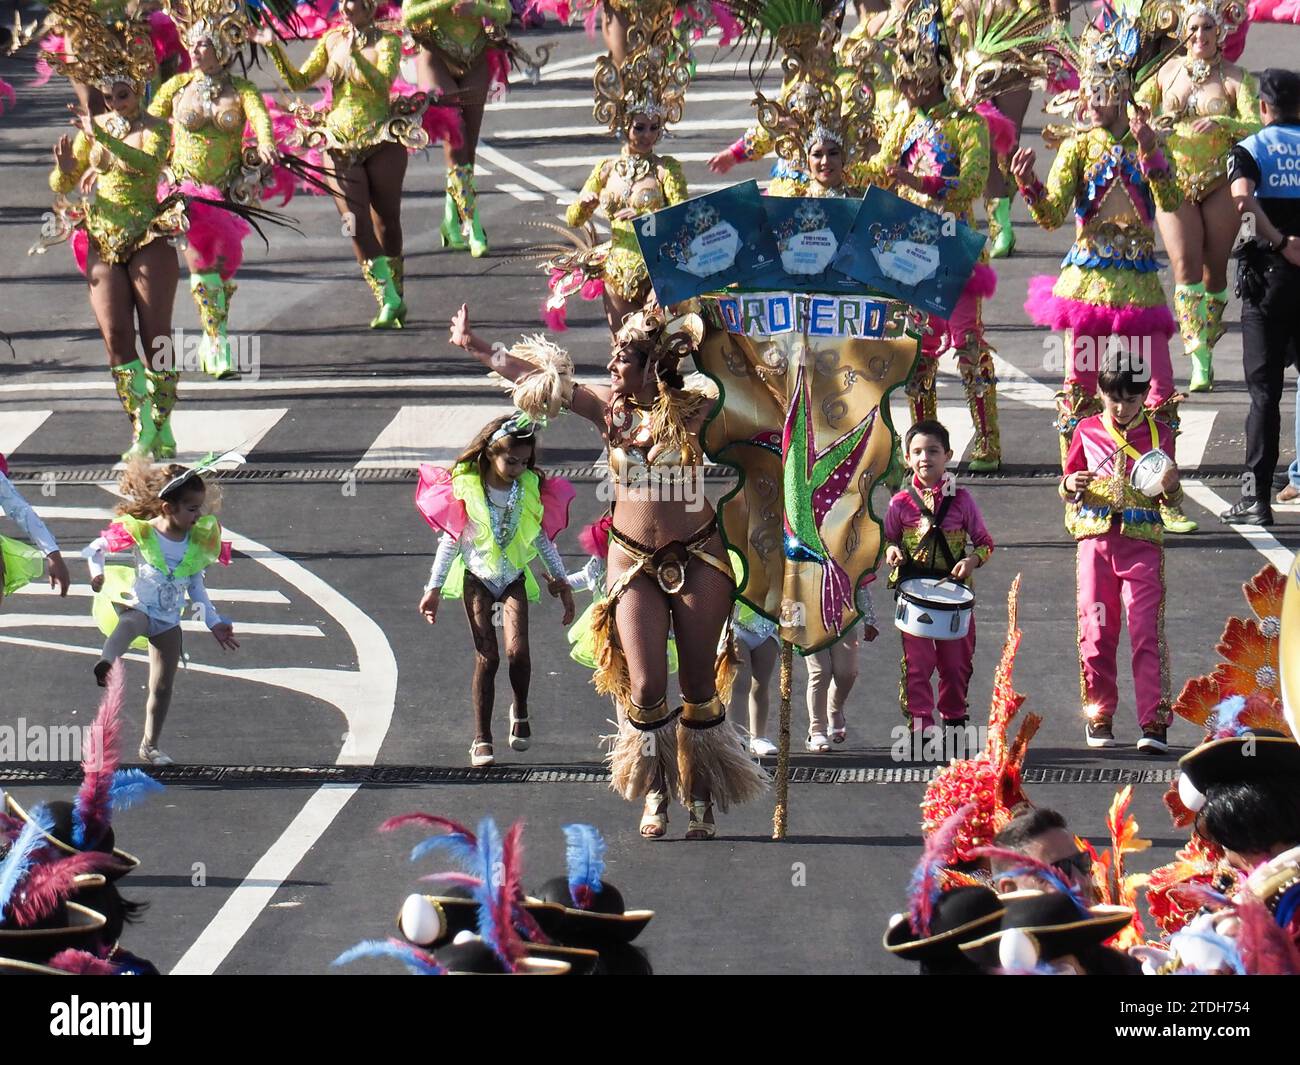 Tenerife, Spain- mar 05, 2019: Famous Carnival Festival in the streets of Santa Cruz de Tenerife, characters and groups to the rhythm of percussion. Stock Photo